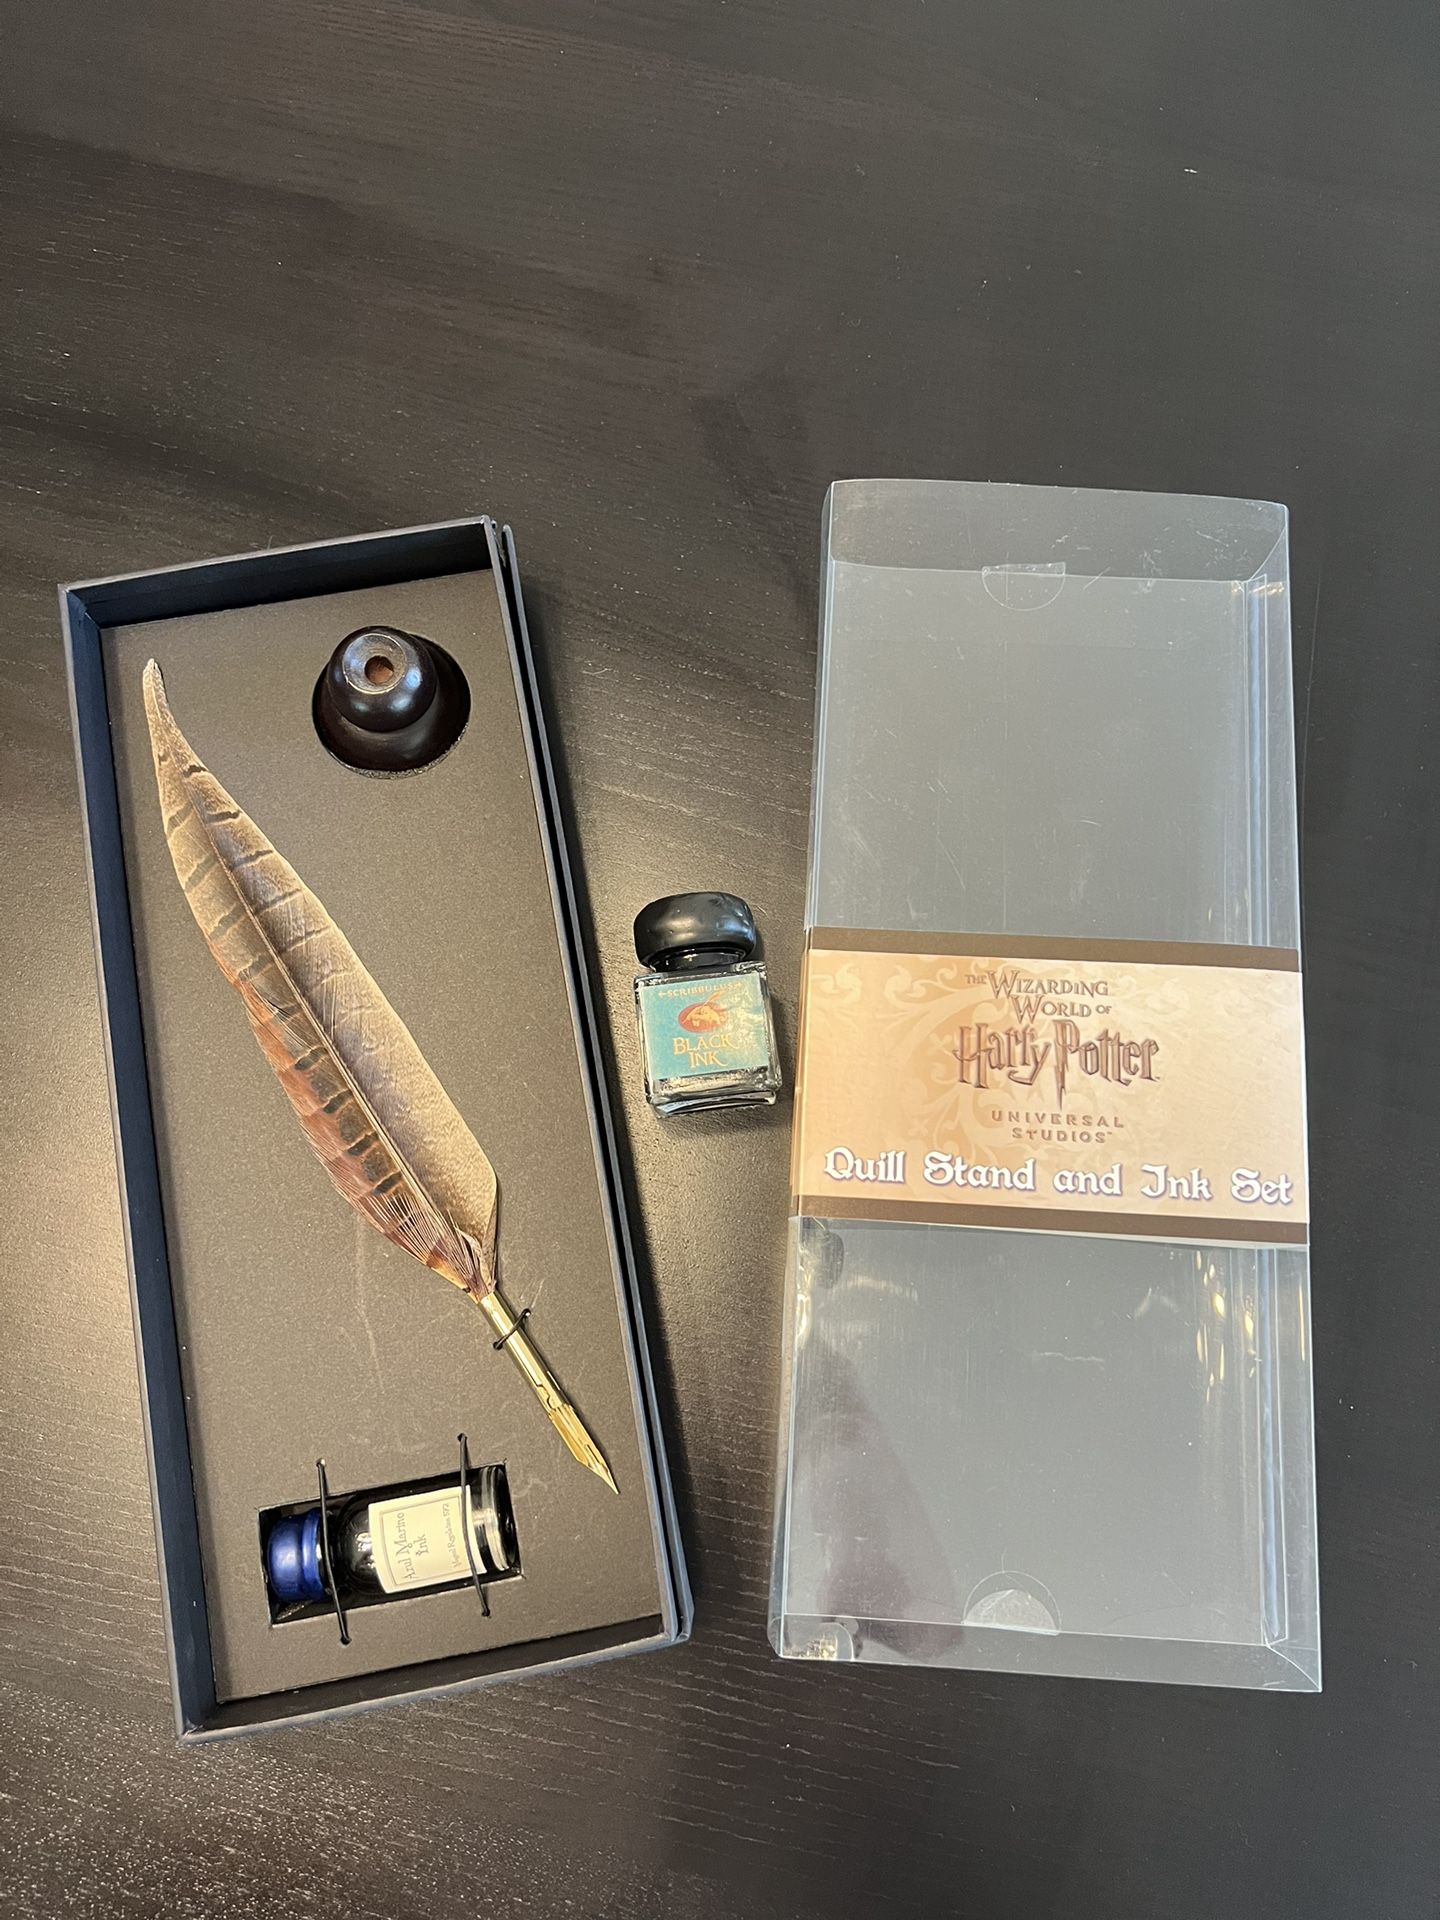 Harry Potter Quill and Ink Set